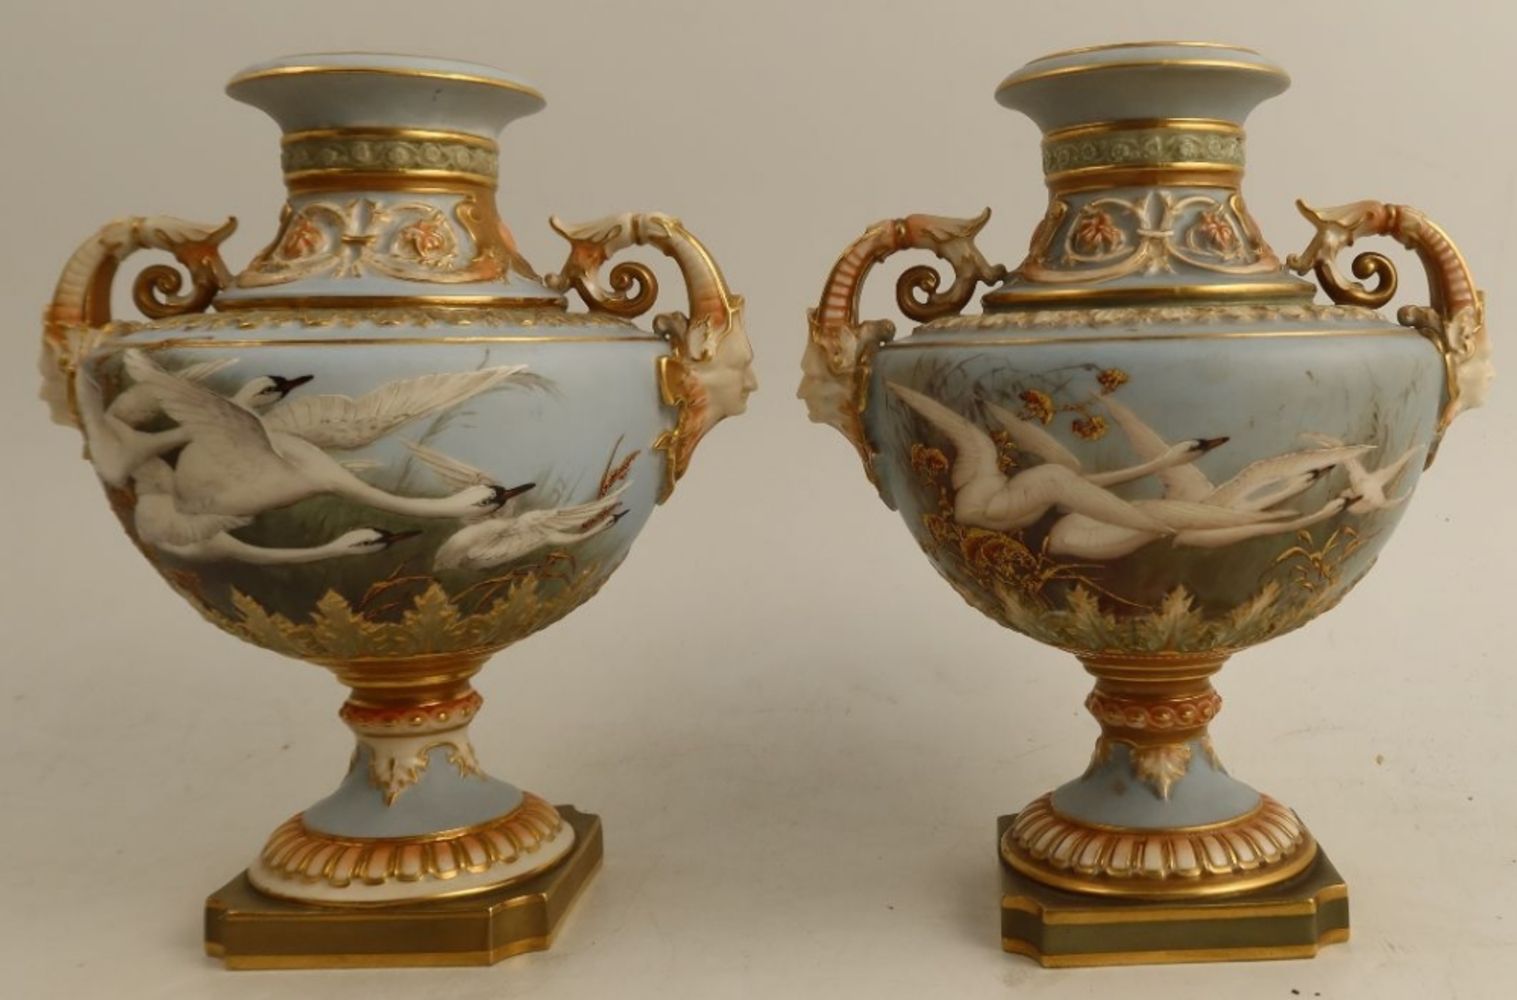 15 September 2022 Fine Art and Antiques Sale